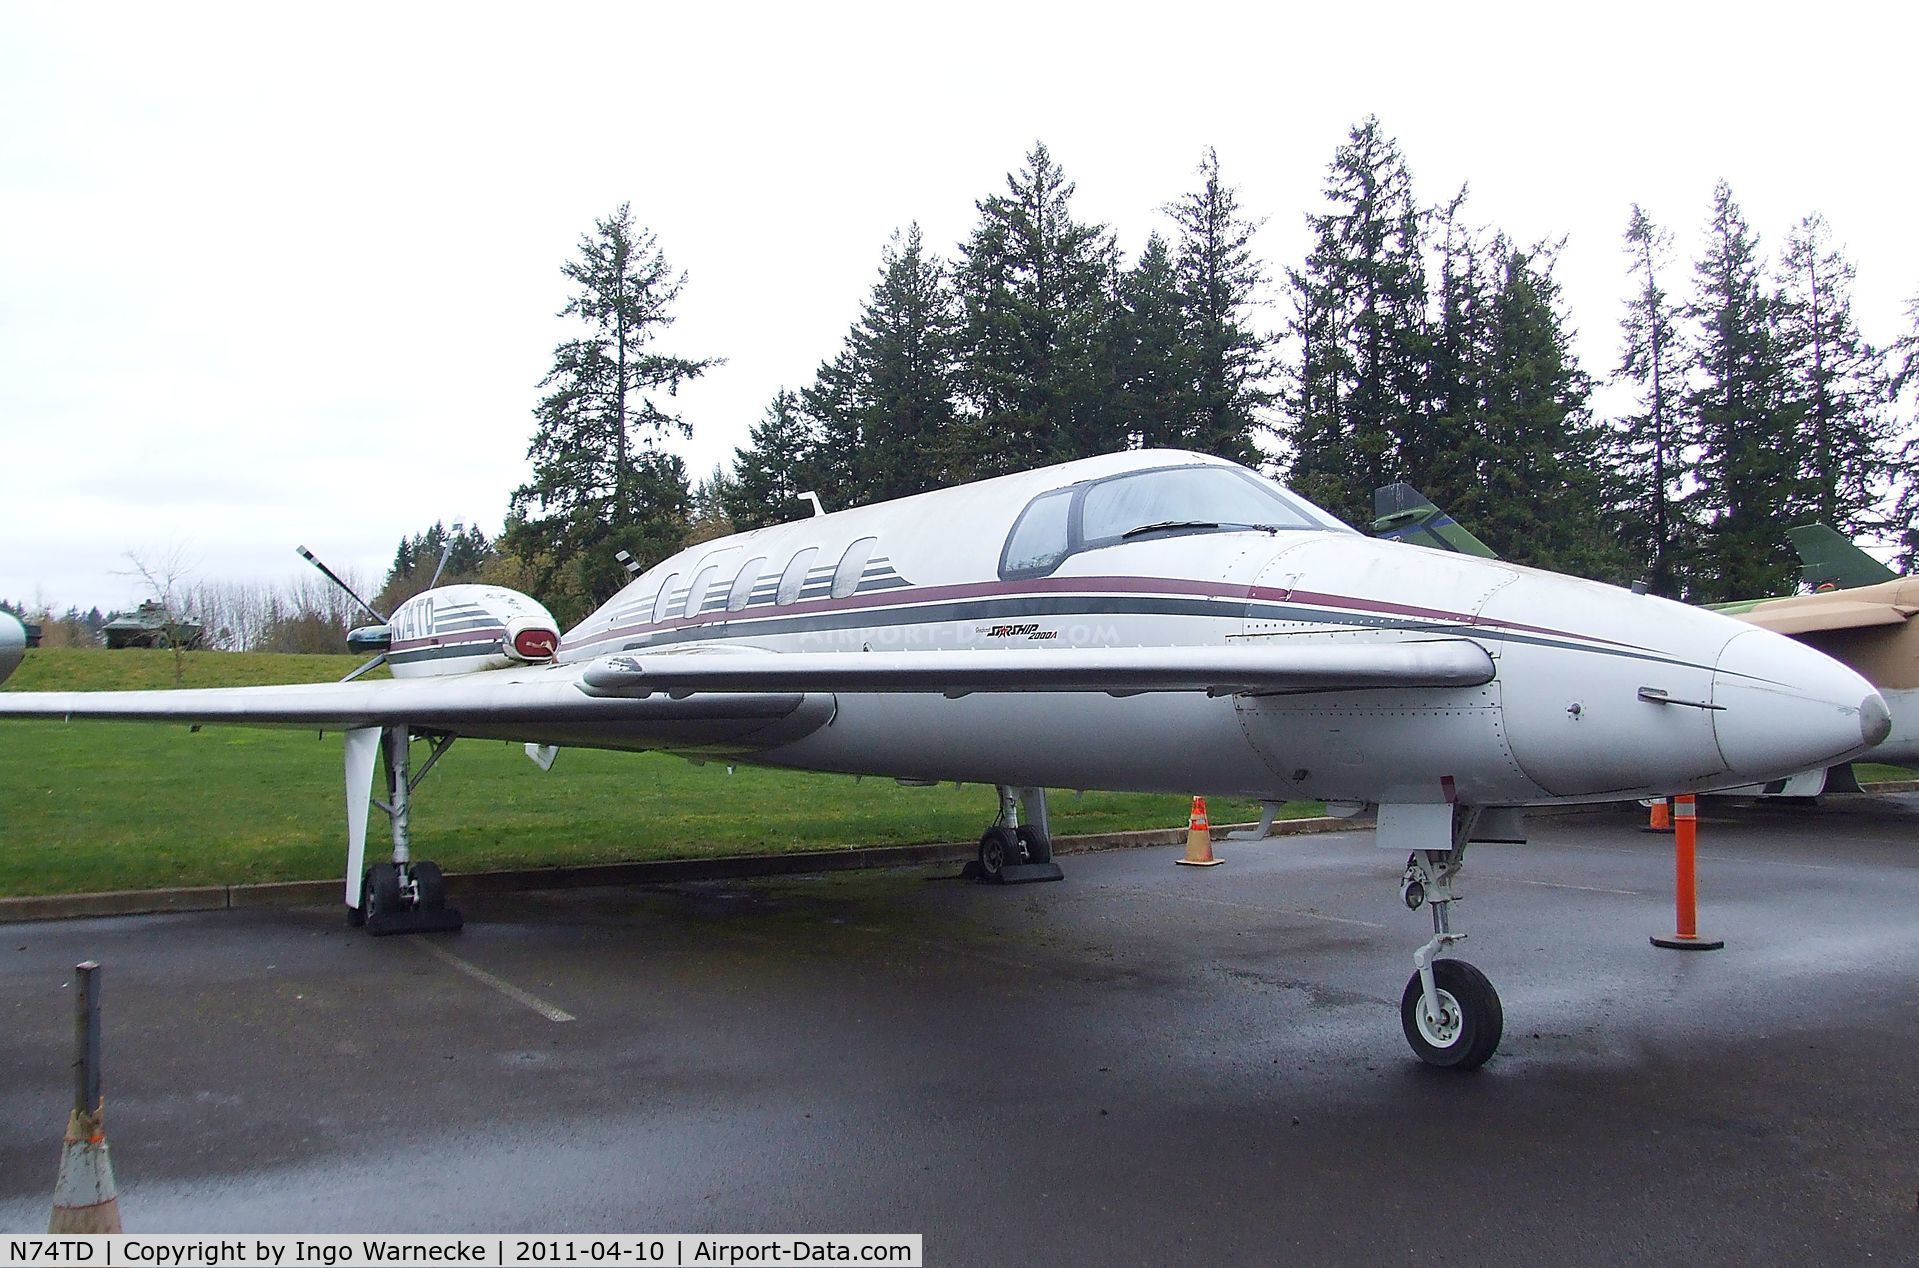 N74TD, 1992 Beech 2000A Starship 1 Starship 1 C/N NC-27, Beechcraft 2000A Starship at the Evergreen Aviation & Space Museum, McMinnville OR